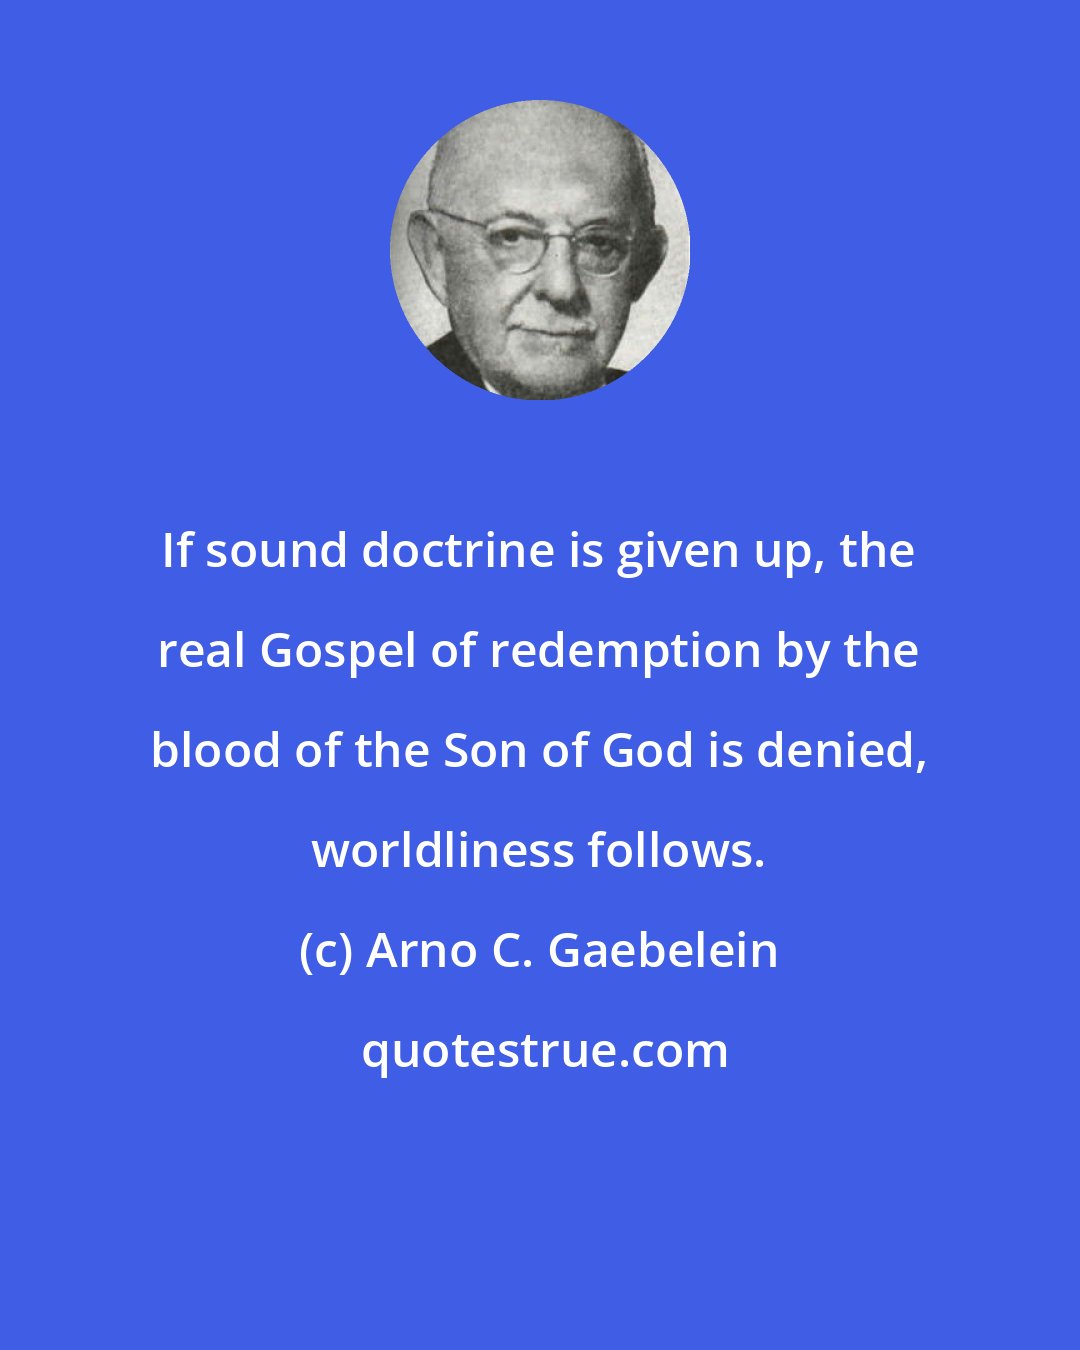 Arno C. Gaebelein: If sound doctrine is given up, the real Gospel of redemption by the blood of the Son of God is denied, worldliness follows.